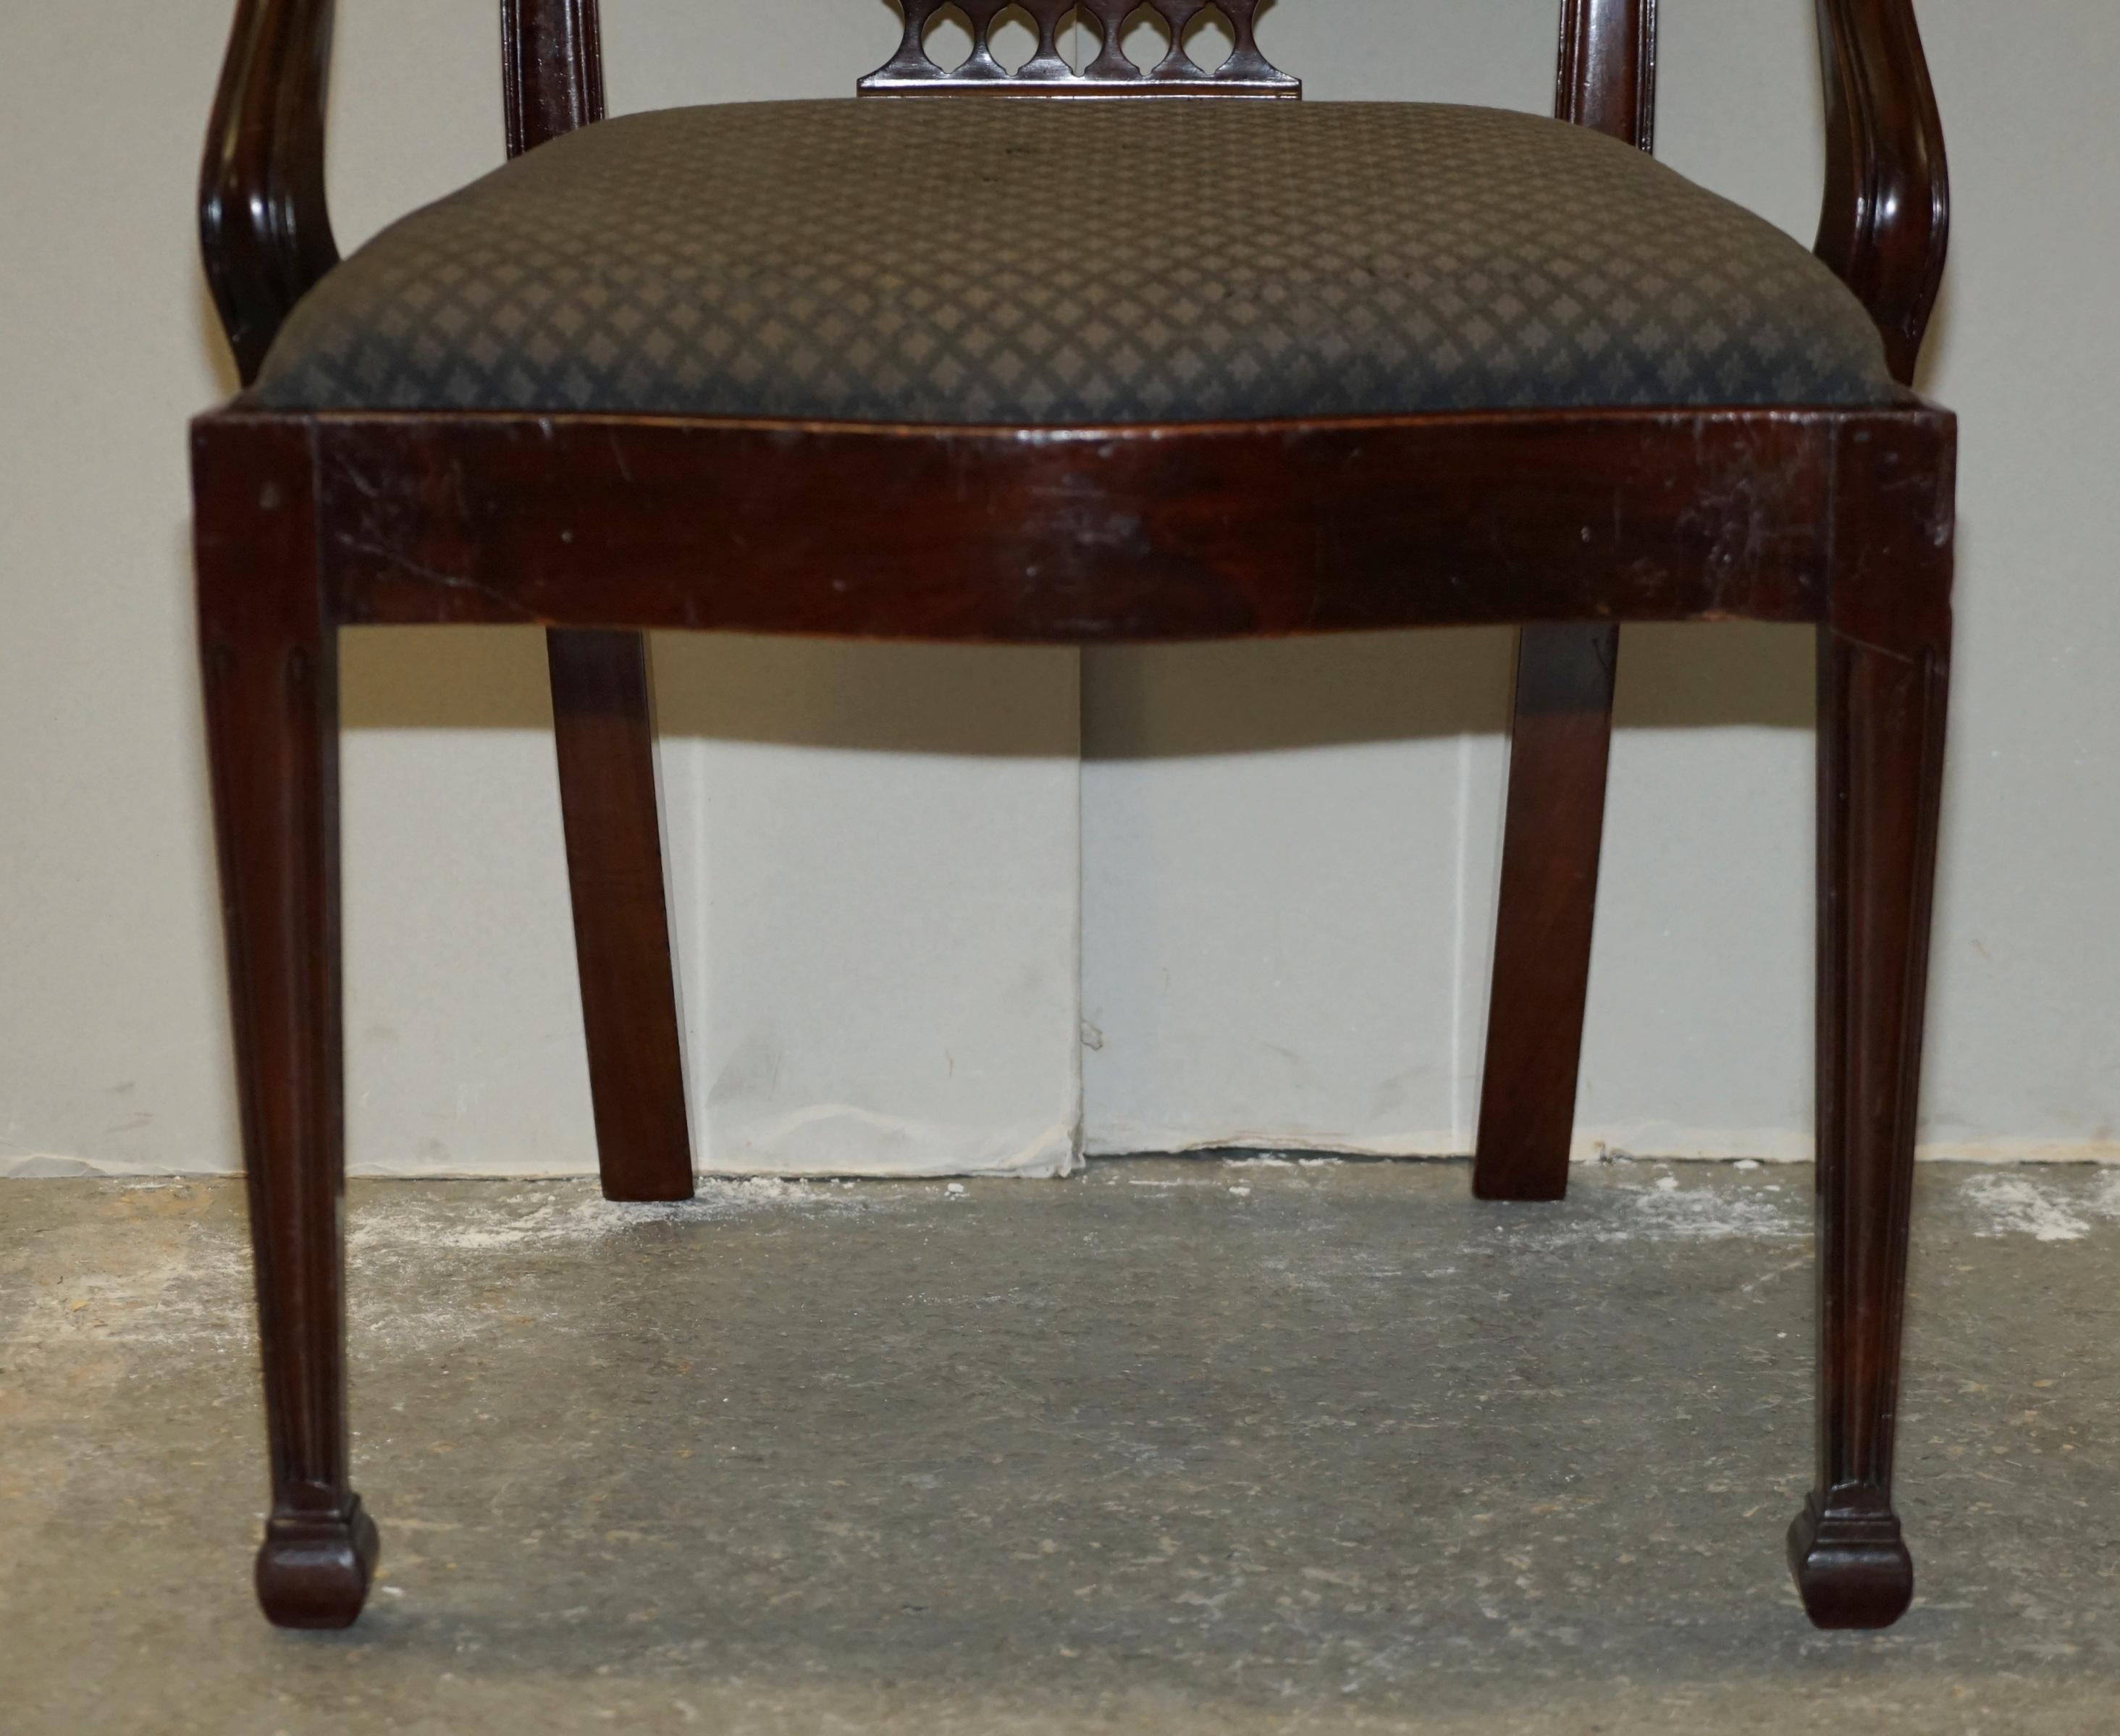 8 ANTIQUE GEORGE HEPPLEWHITE STYLE DINING CHAIRS FROM LADY DIANA'S SPENCER HOUSE im Angebot 1